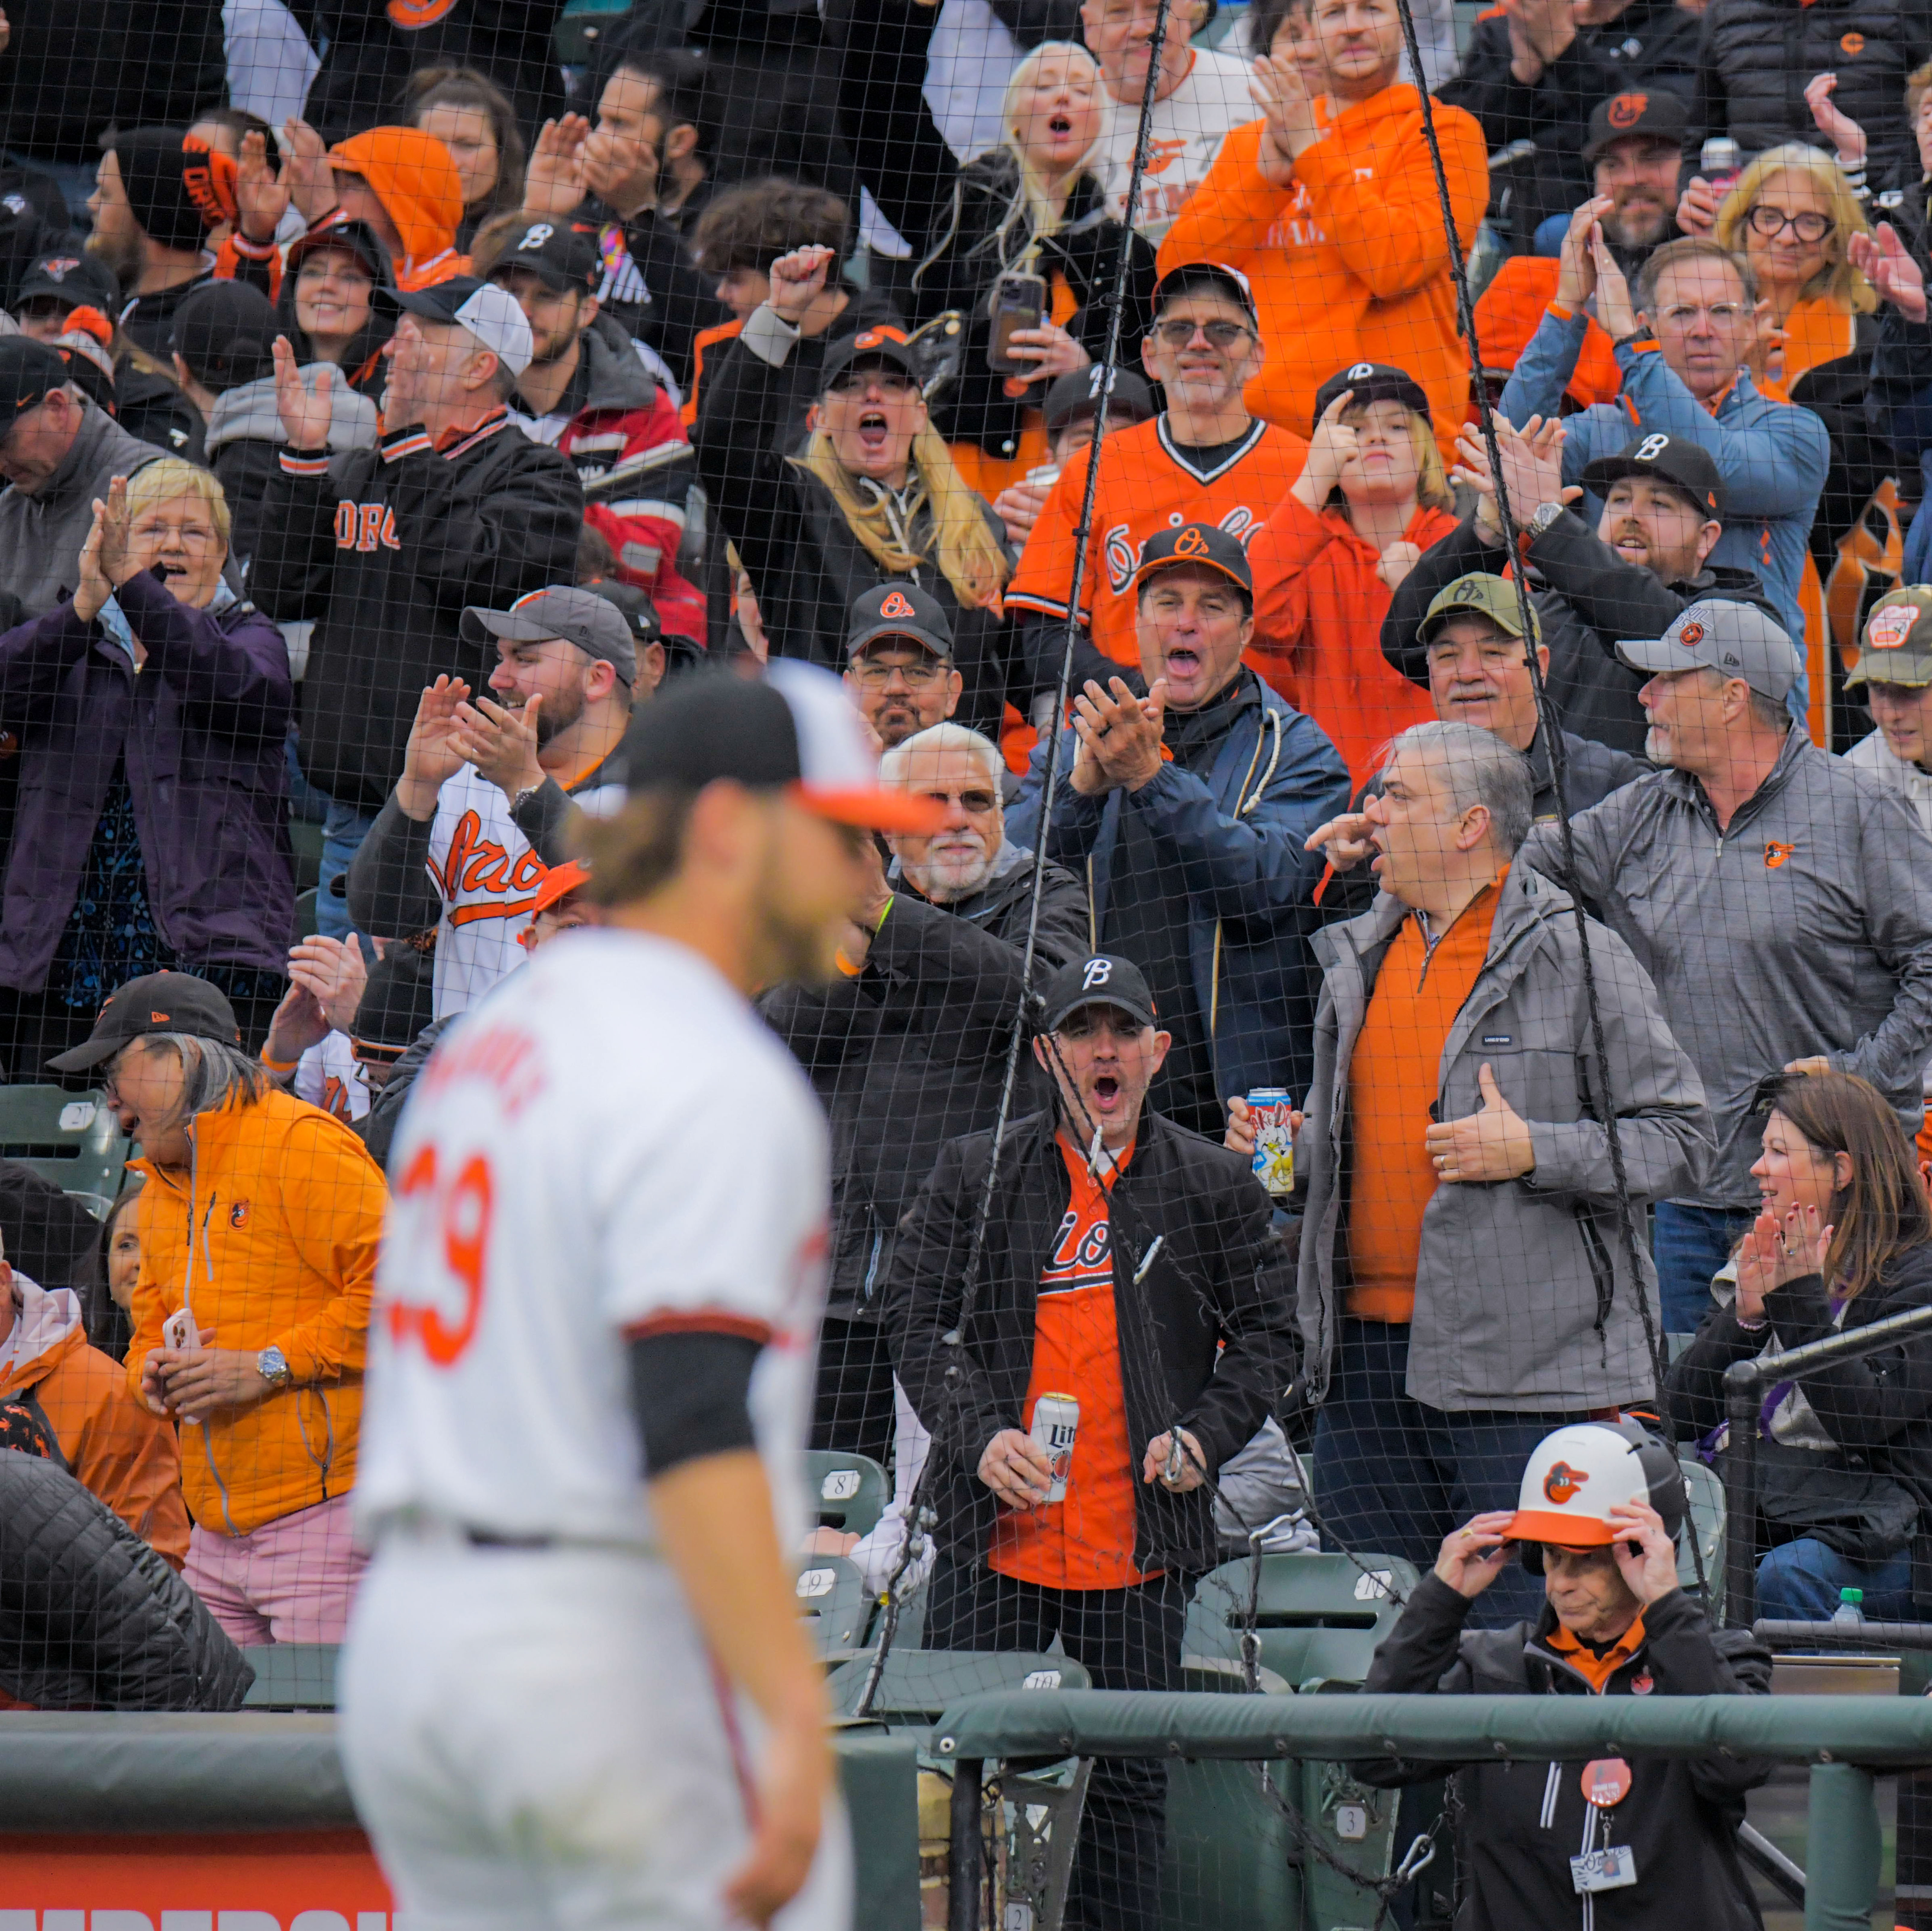 Mar 28, 2024: Fans applaud Baltimore Orioles starting pitcher Corbin Burnes as he finishes his outing against the Los Angeles Angels during opening day of Major League Baseball at Oriole Park at Camden Yards. (Karl Merton Ferron/Staff)